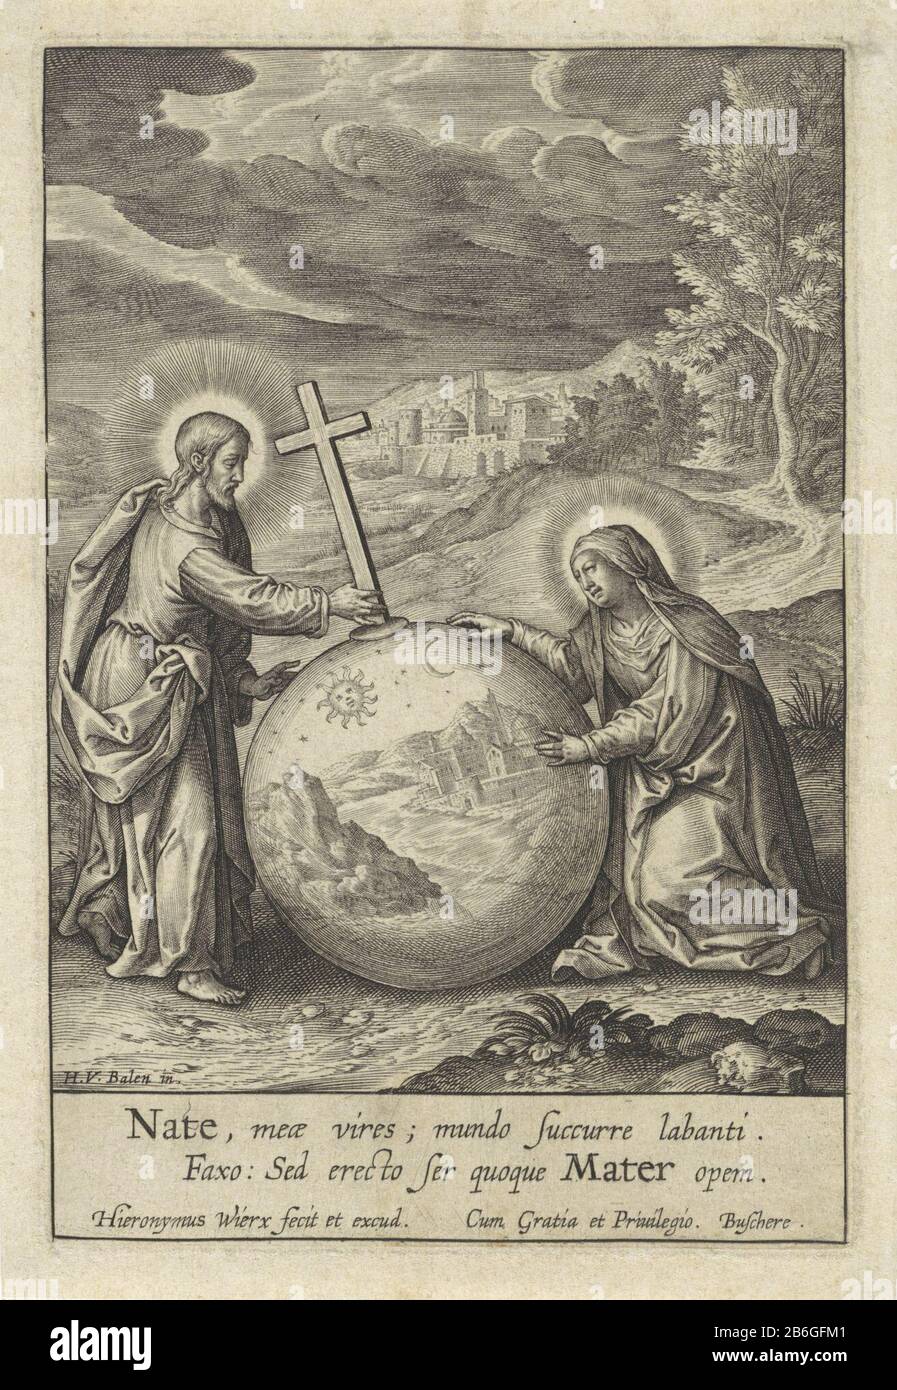 Christ and Mary in an orb in a landscape Landscape with Christ as Salvator Mundi and the virgin Mary in a large orb Where: is mapped to the city of Jerusalem. Christ extends his hand to his mother. In the margin a two-line caption in Latijn. Manufacturer : printmaker: Jerome Who: rix (listed building), designed by Hendrik van Balen (listed building) Publisher: Hieronymus Wierix (listed property) provider of privilege: Joachim de Buschere (indicated on object) Place manufacture: Antwerpen Date: 1563 - for 1619 Physical characteristics: engra material: paper Technique: engra (printing process) M Stock Photo